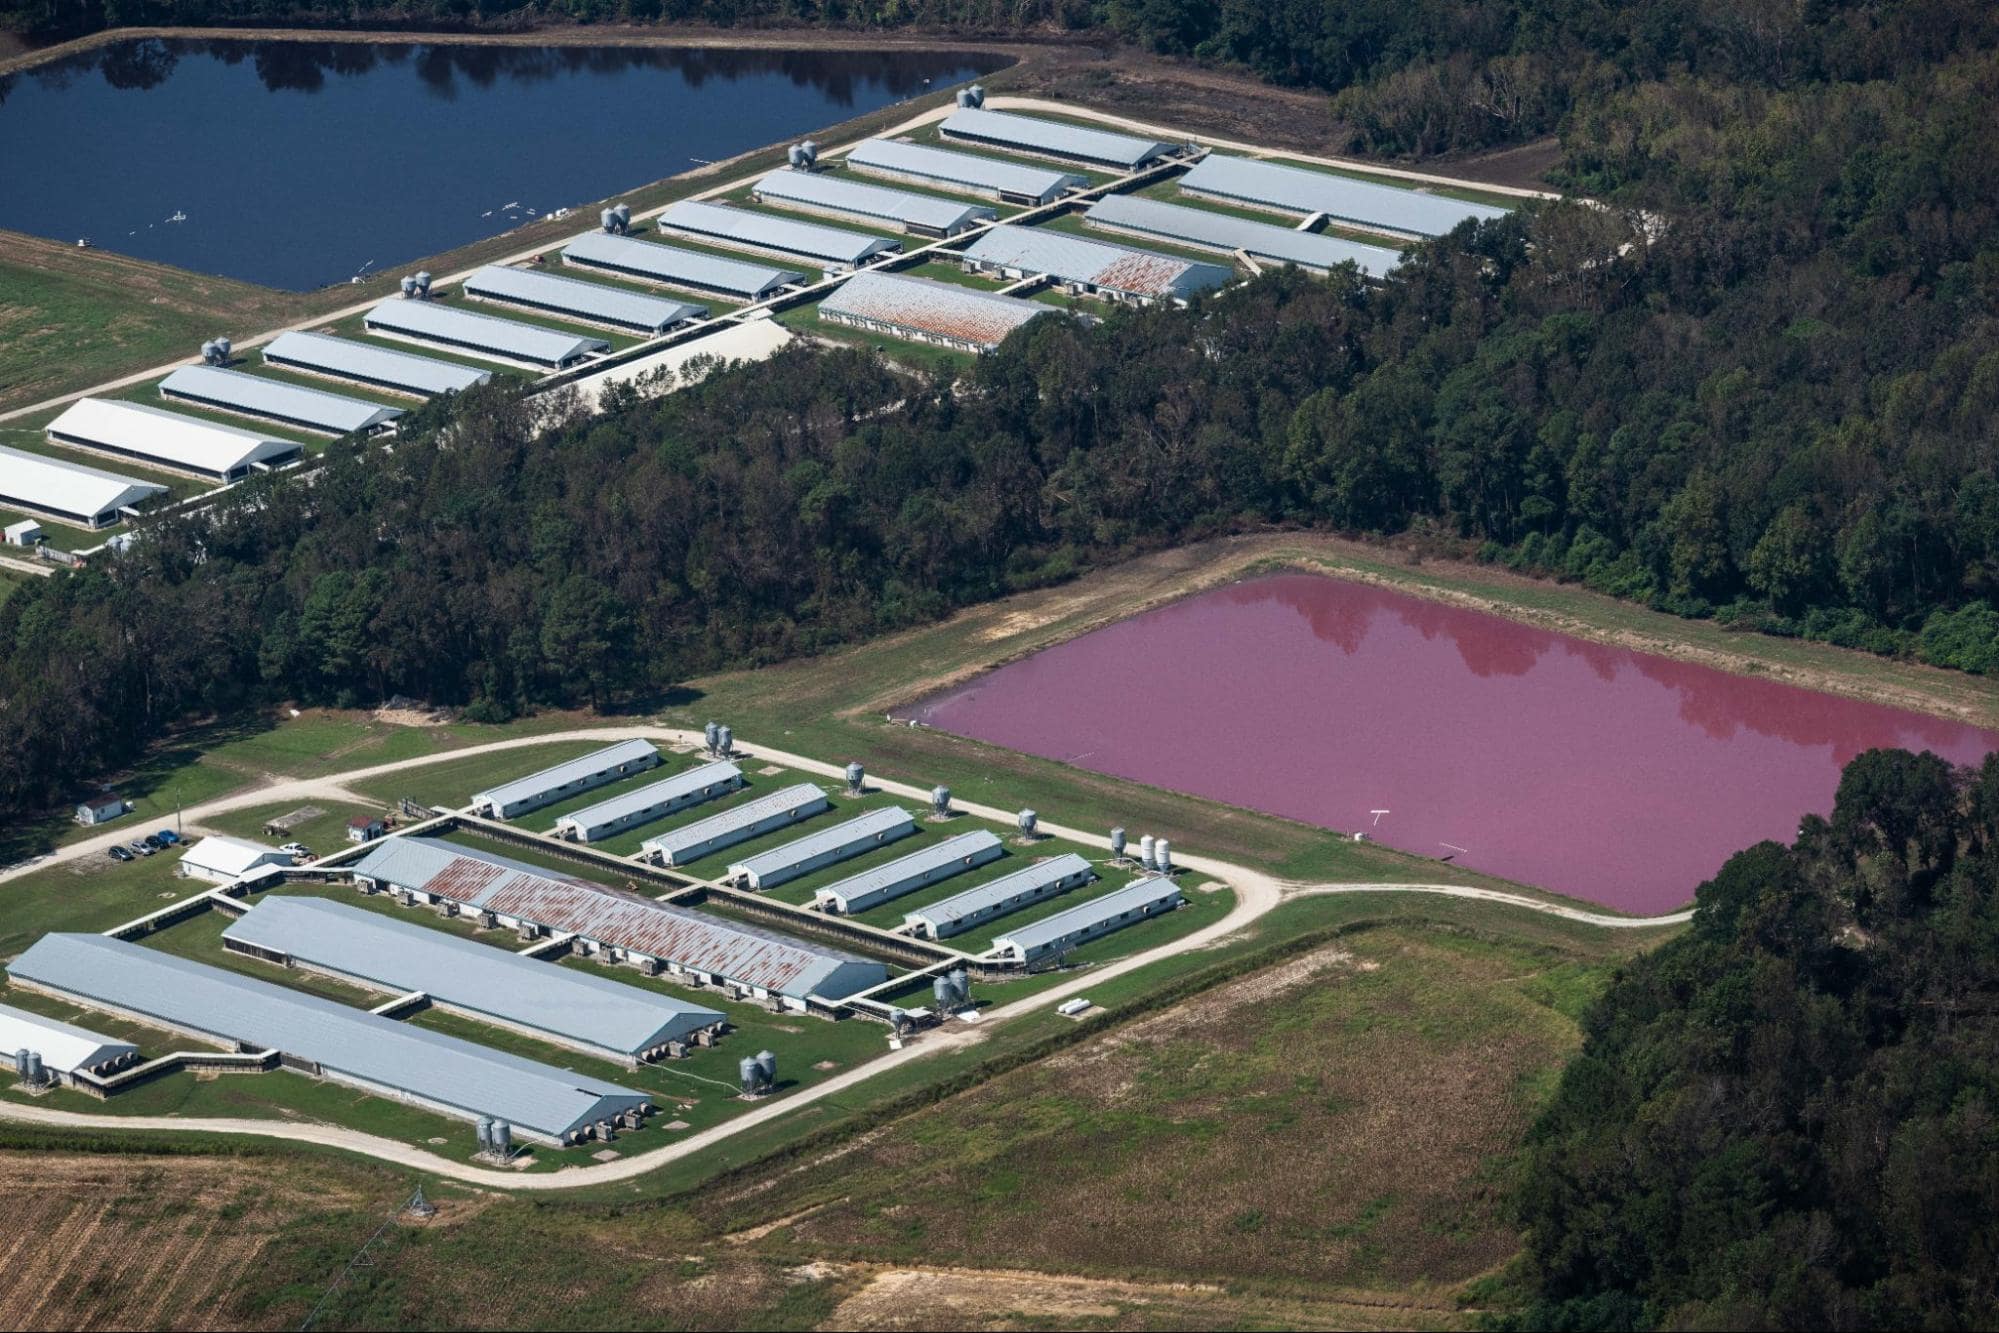 Aerial view of a CAFO farm surrounded by floodwaters in Duplin County. North Carolina, USA